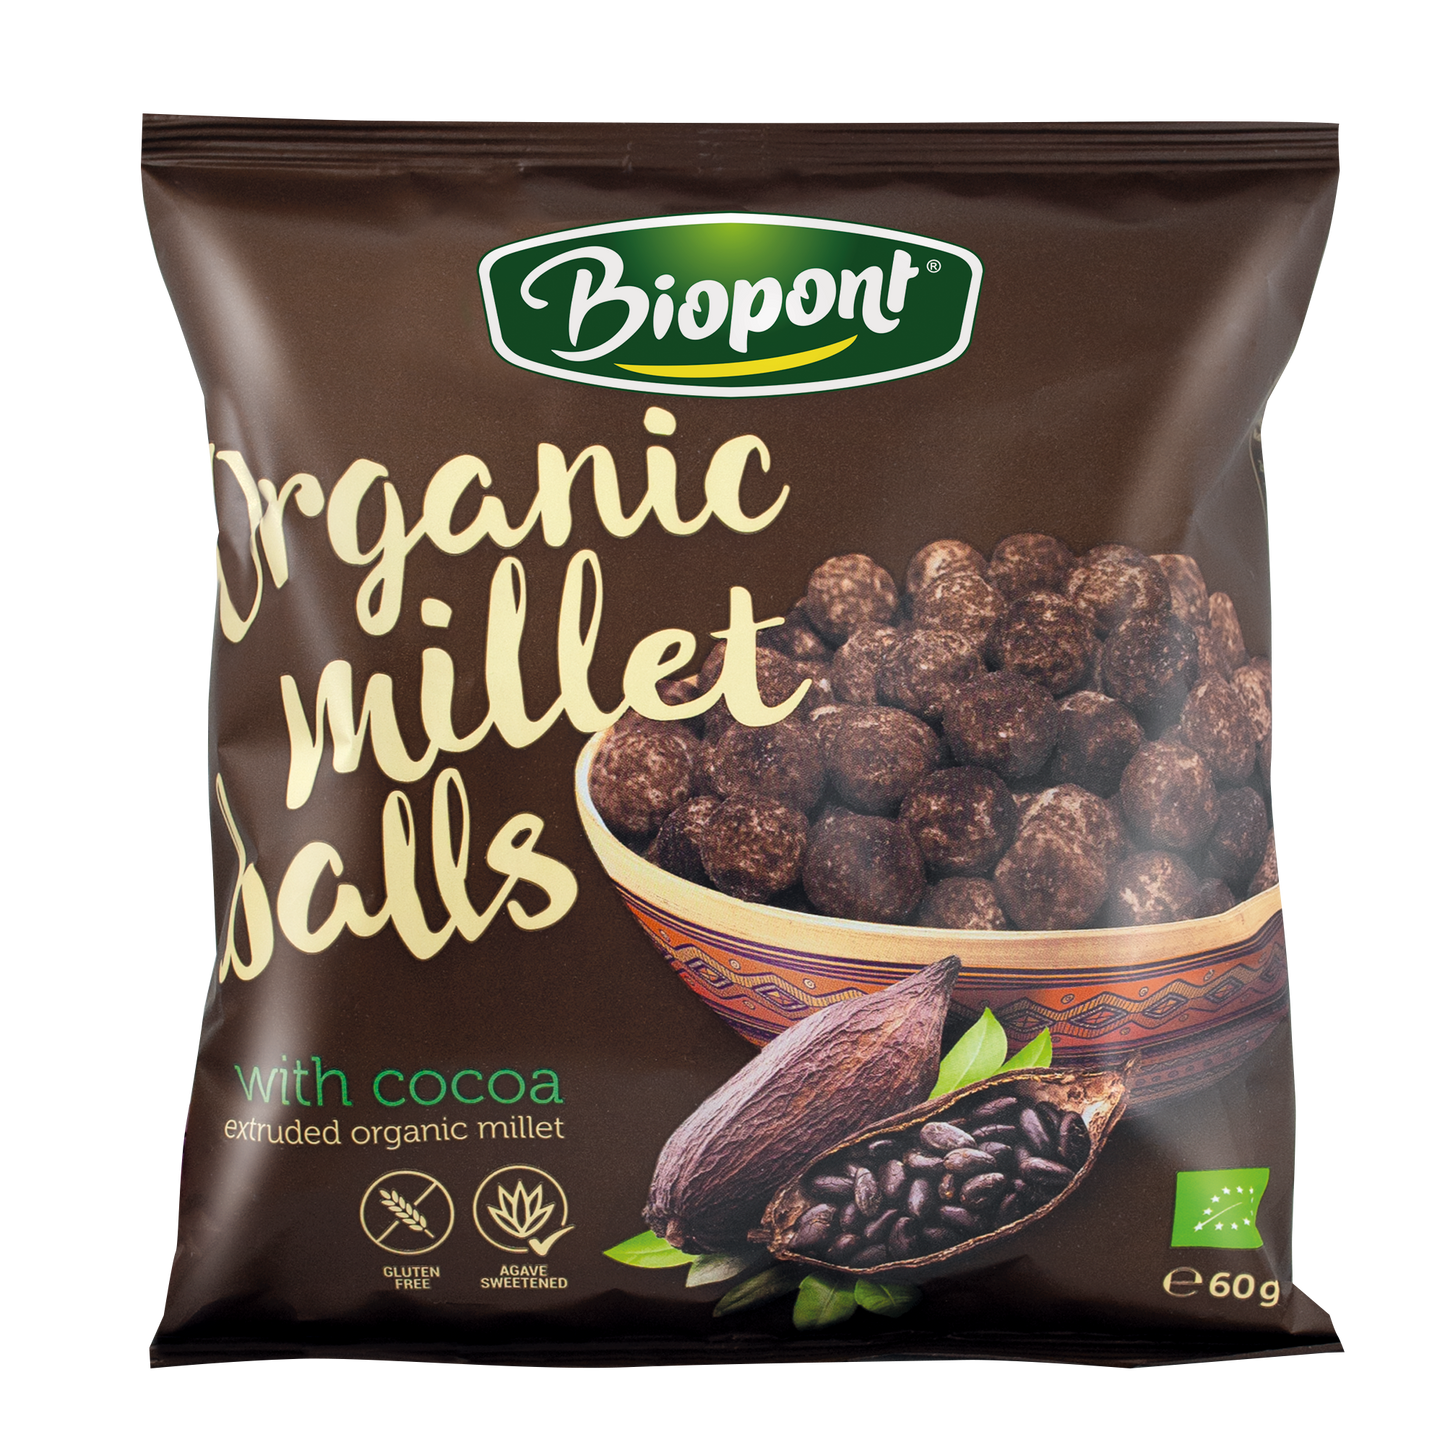 Biopont Organic Millet balls with Cocoa 60g